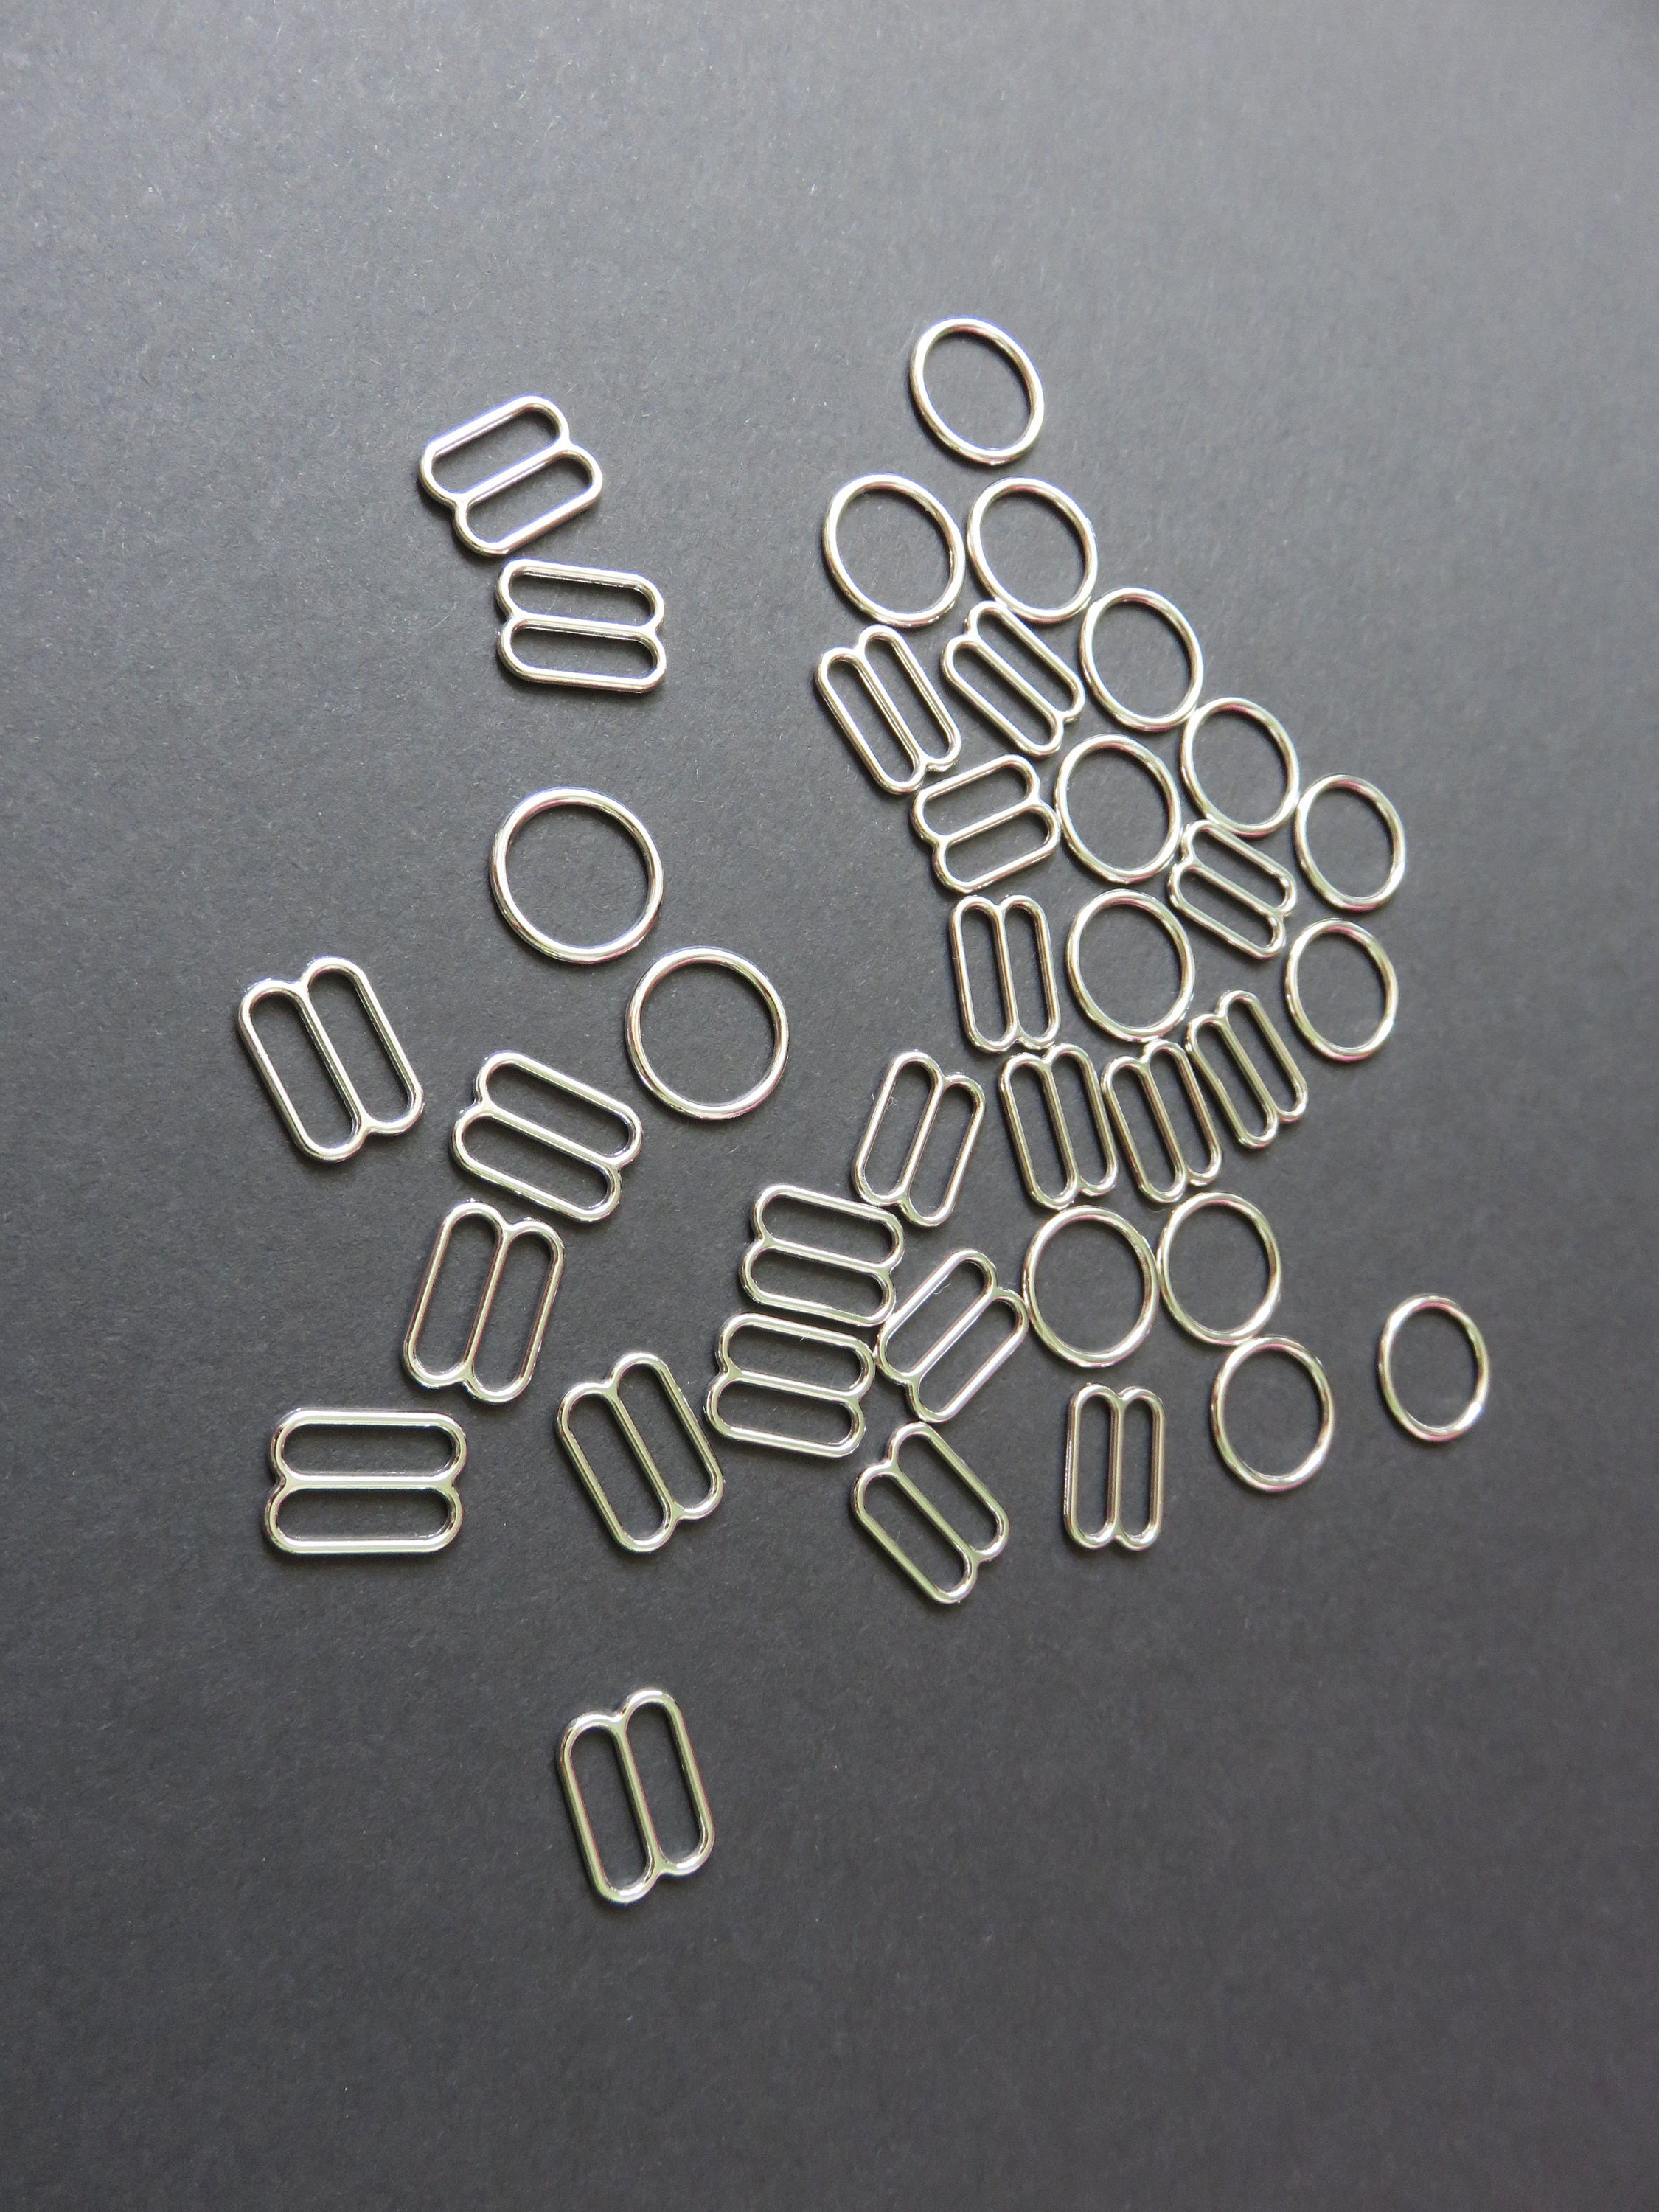 10mm SILVER Colour Bra Rings and Sliders 10mm, 3/8 Metal Alloy